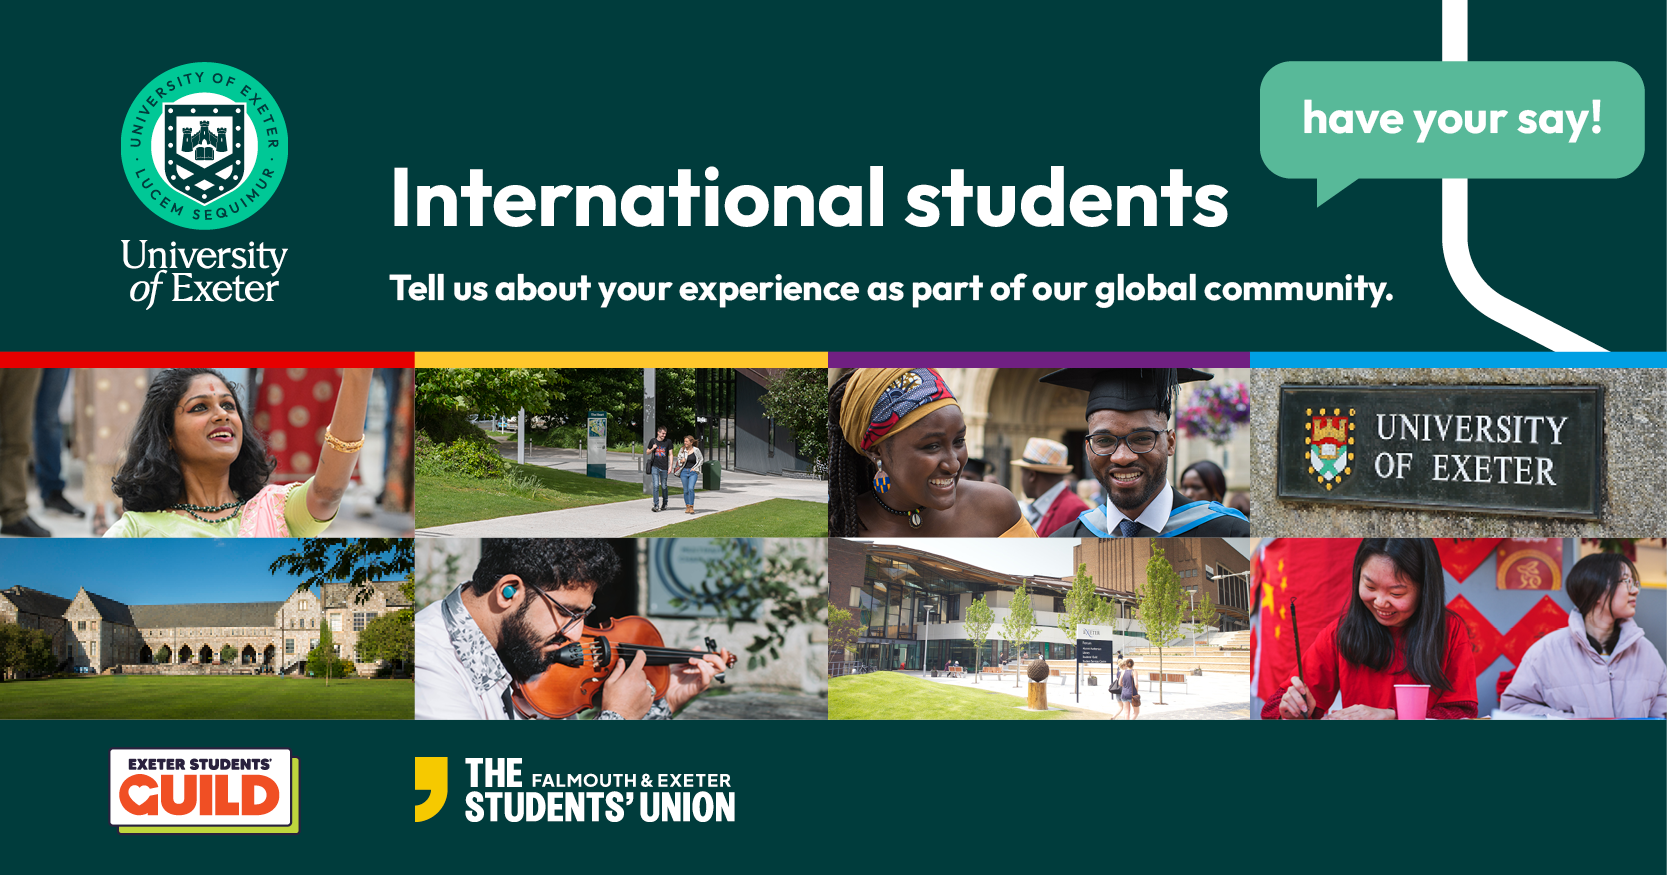 International students have your say